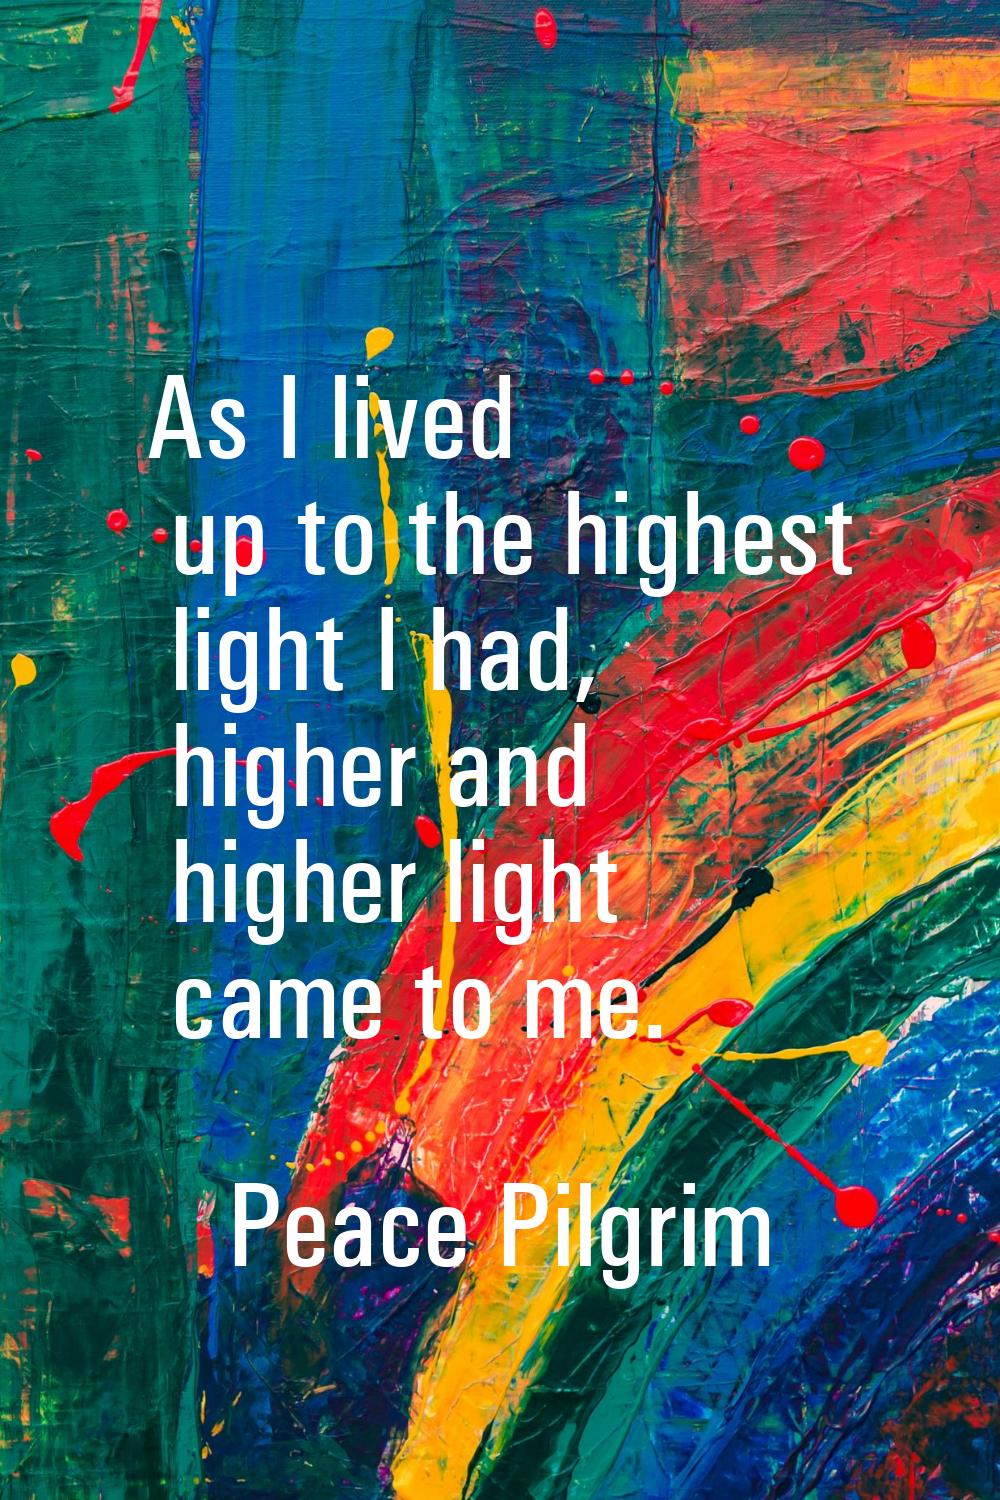 As I lived up to the highest light I had, higher and higher light came to me.